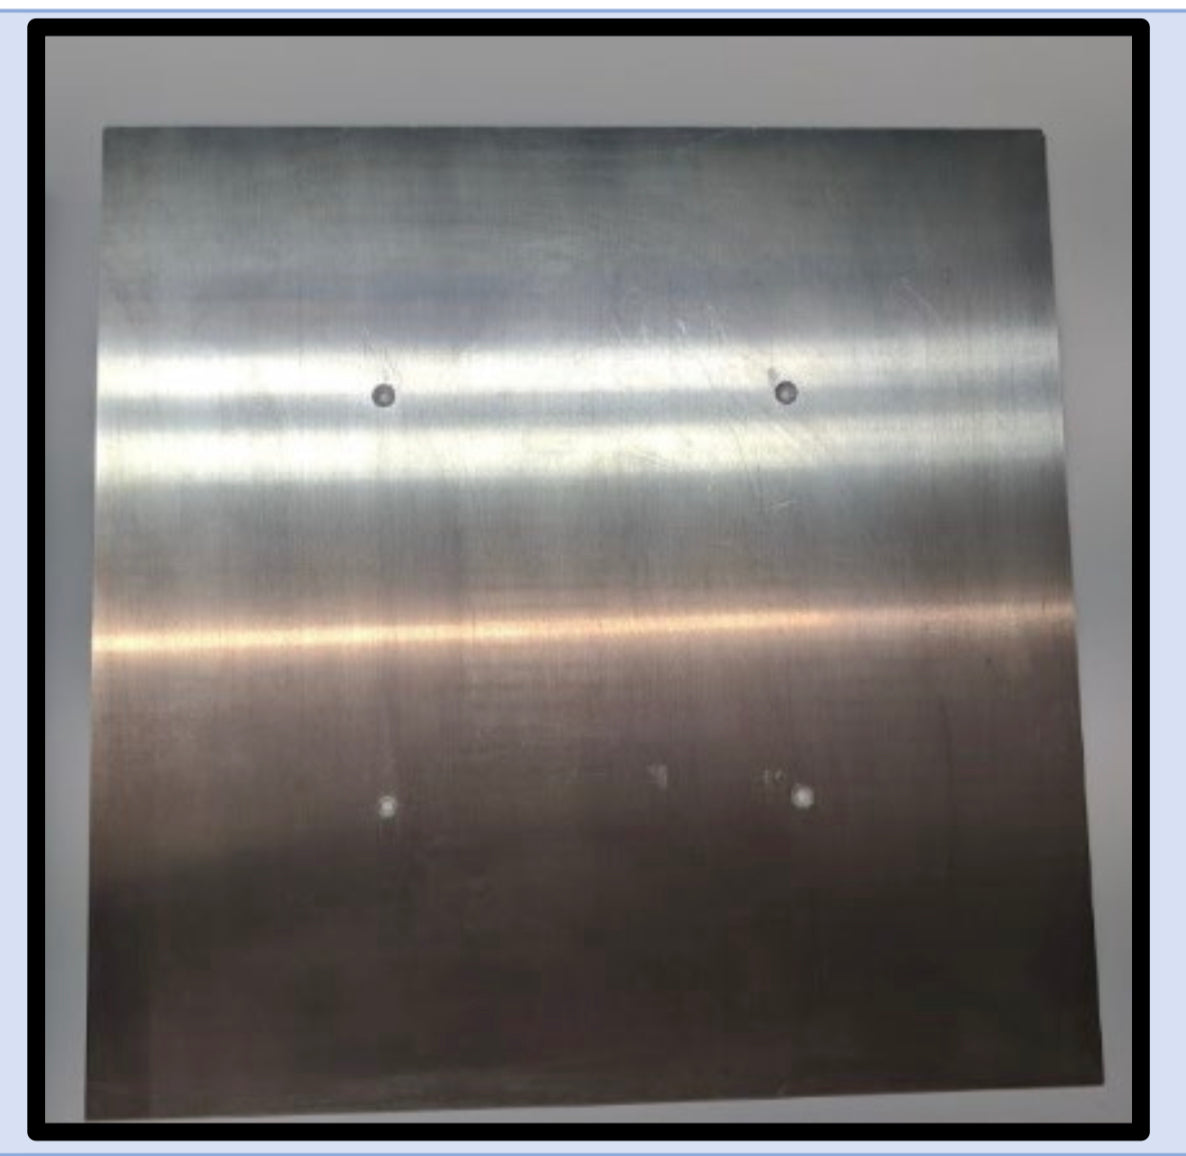 Induction griddle plate – Module 400 x 700 mm